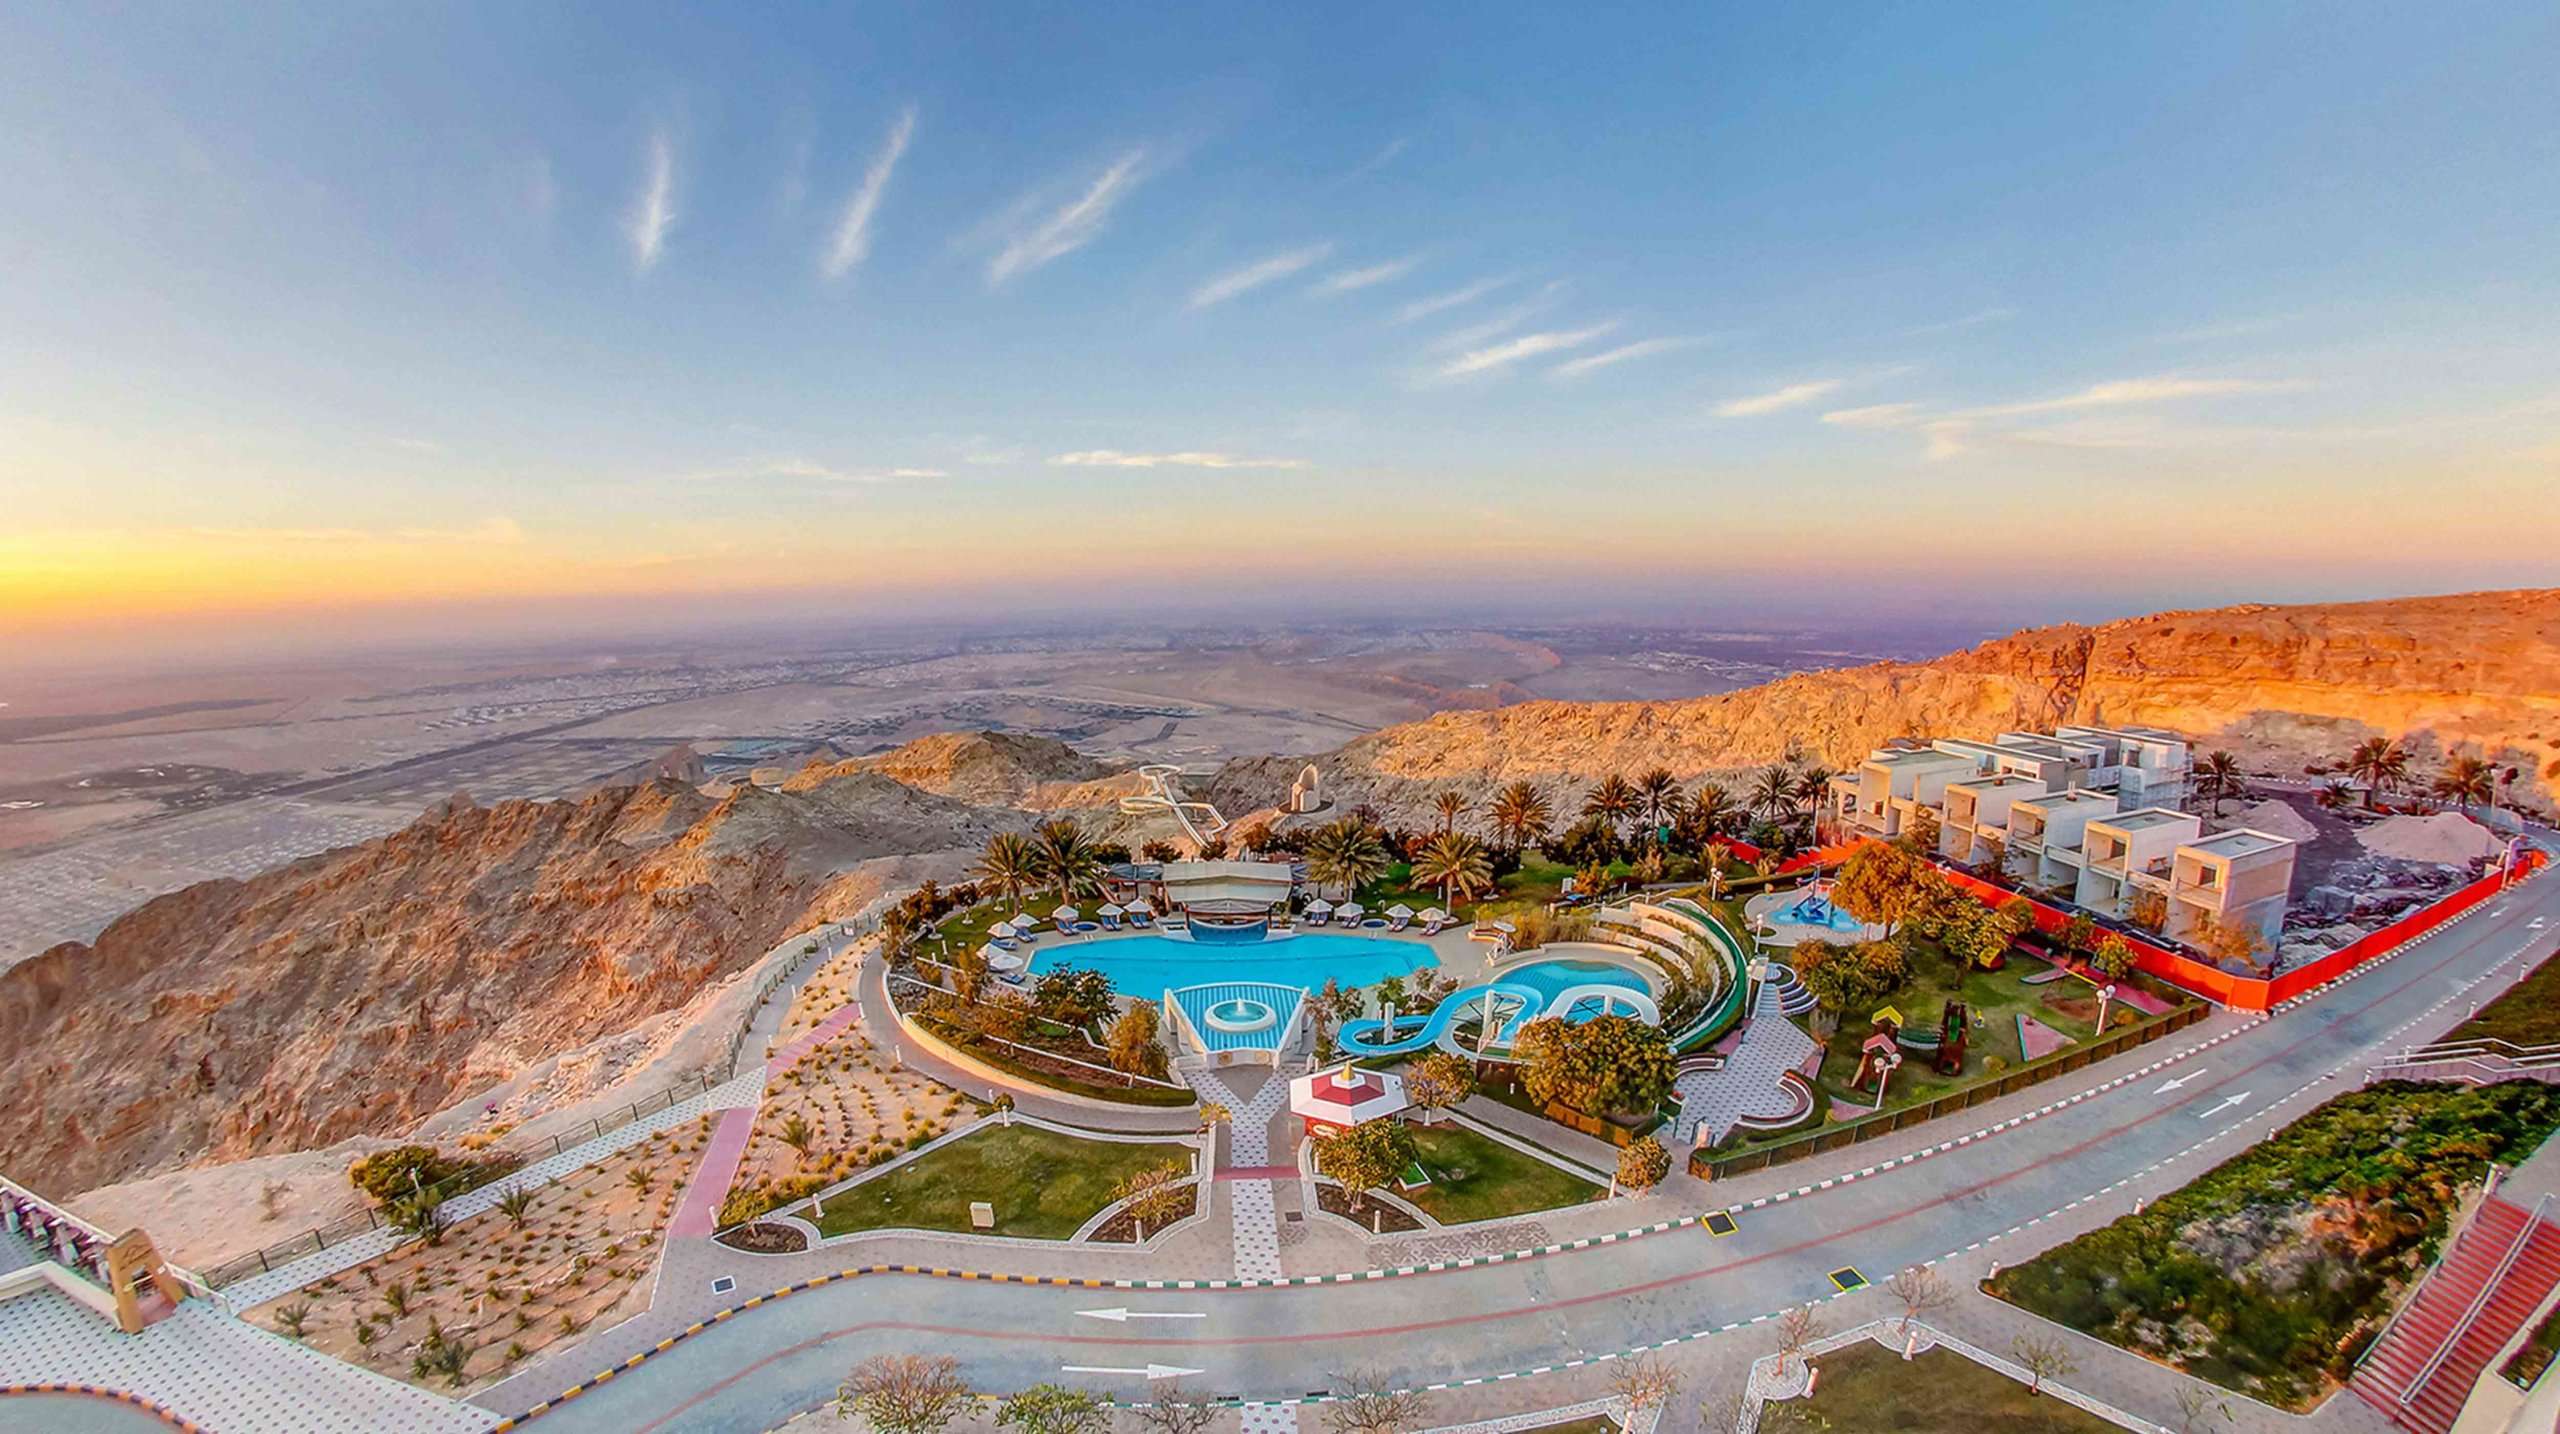 Stay at a Resort in Al Ain